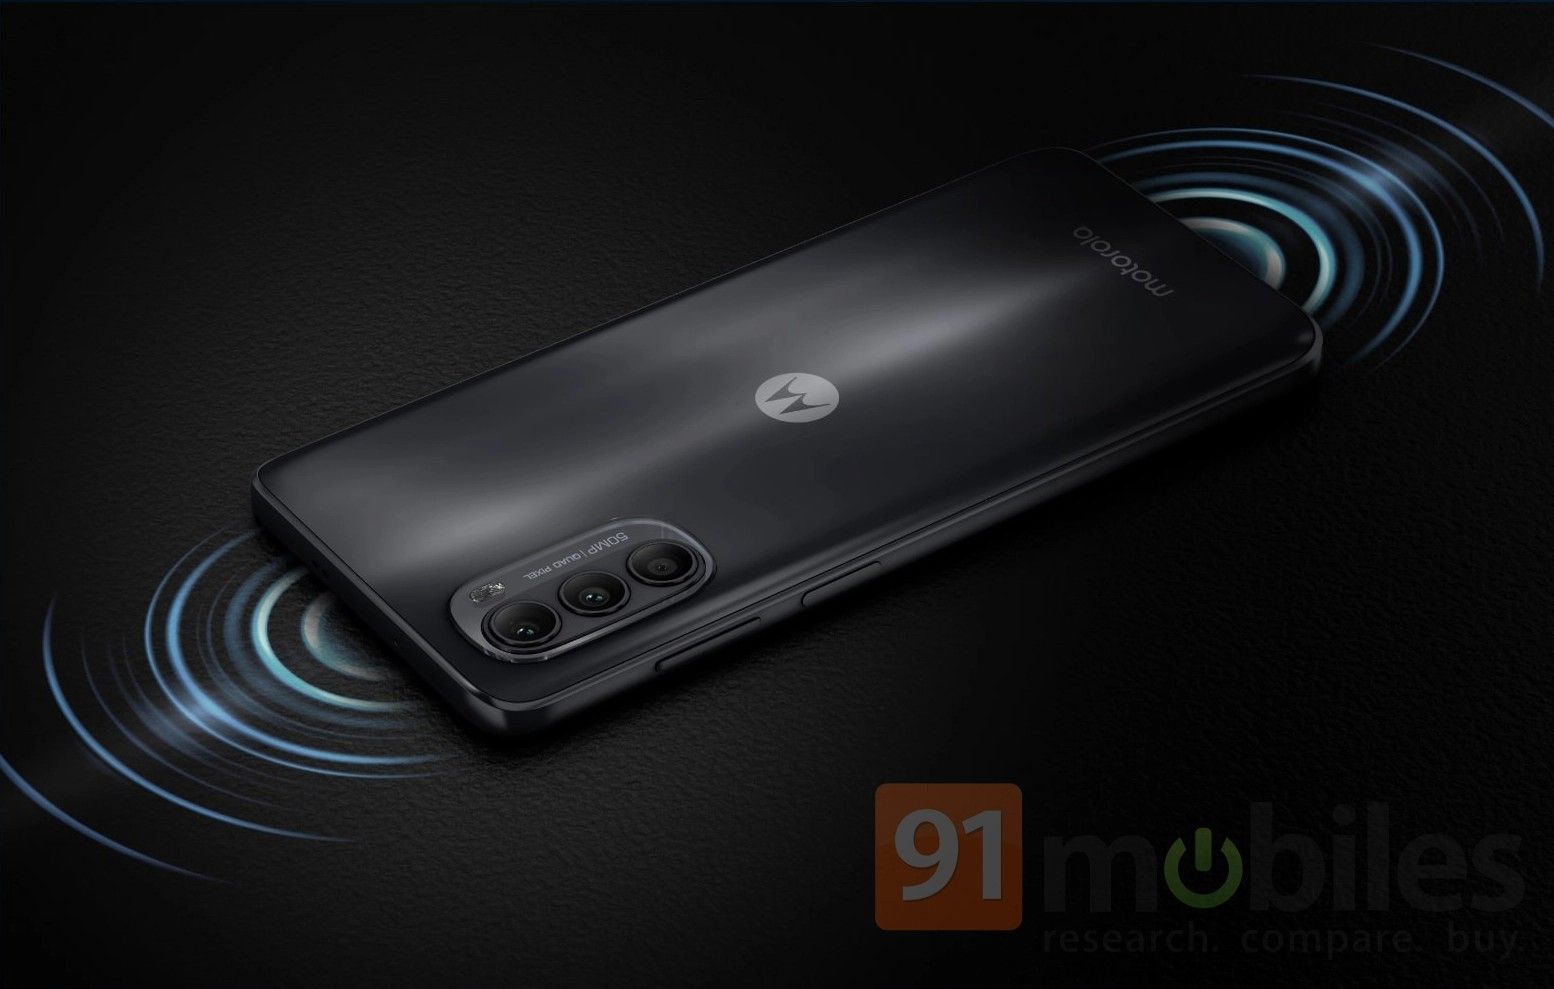 Motorola Moto G52 smartphone specifications and design leaked